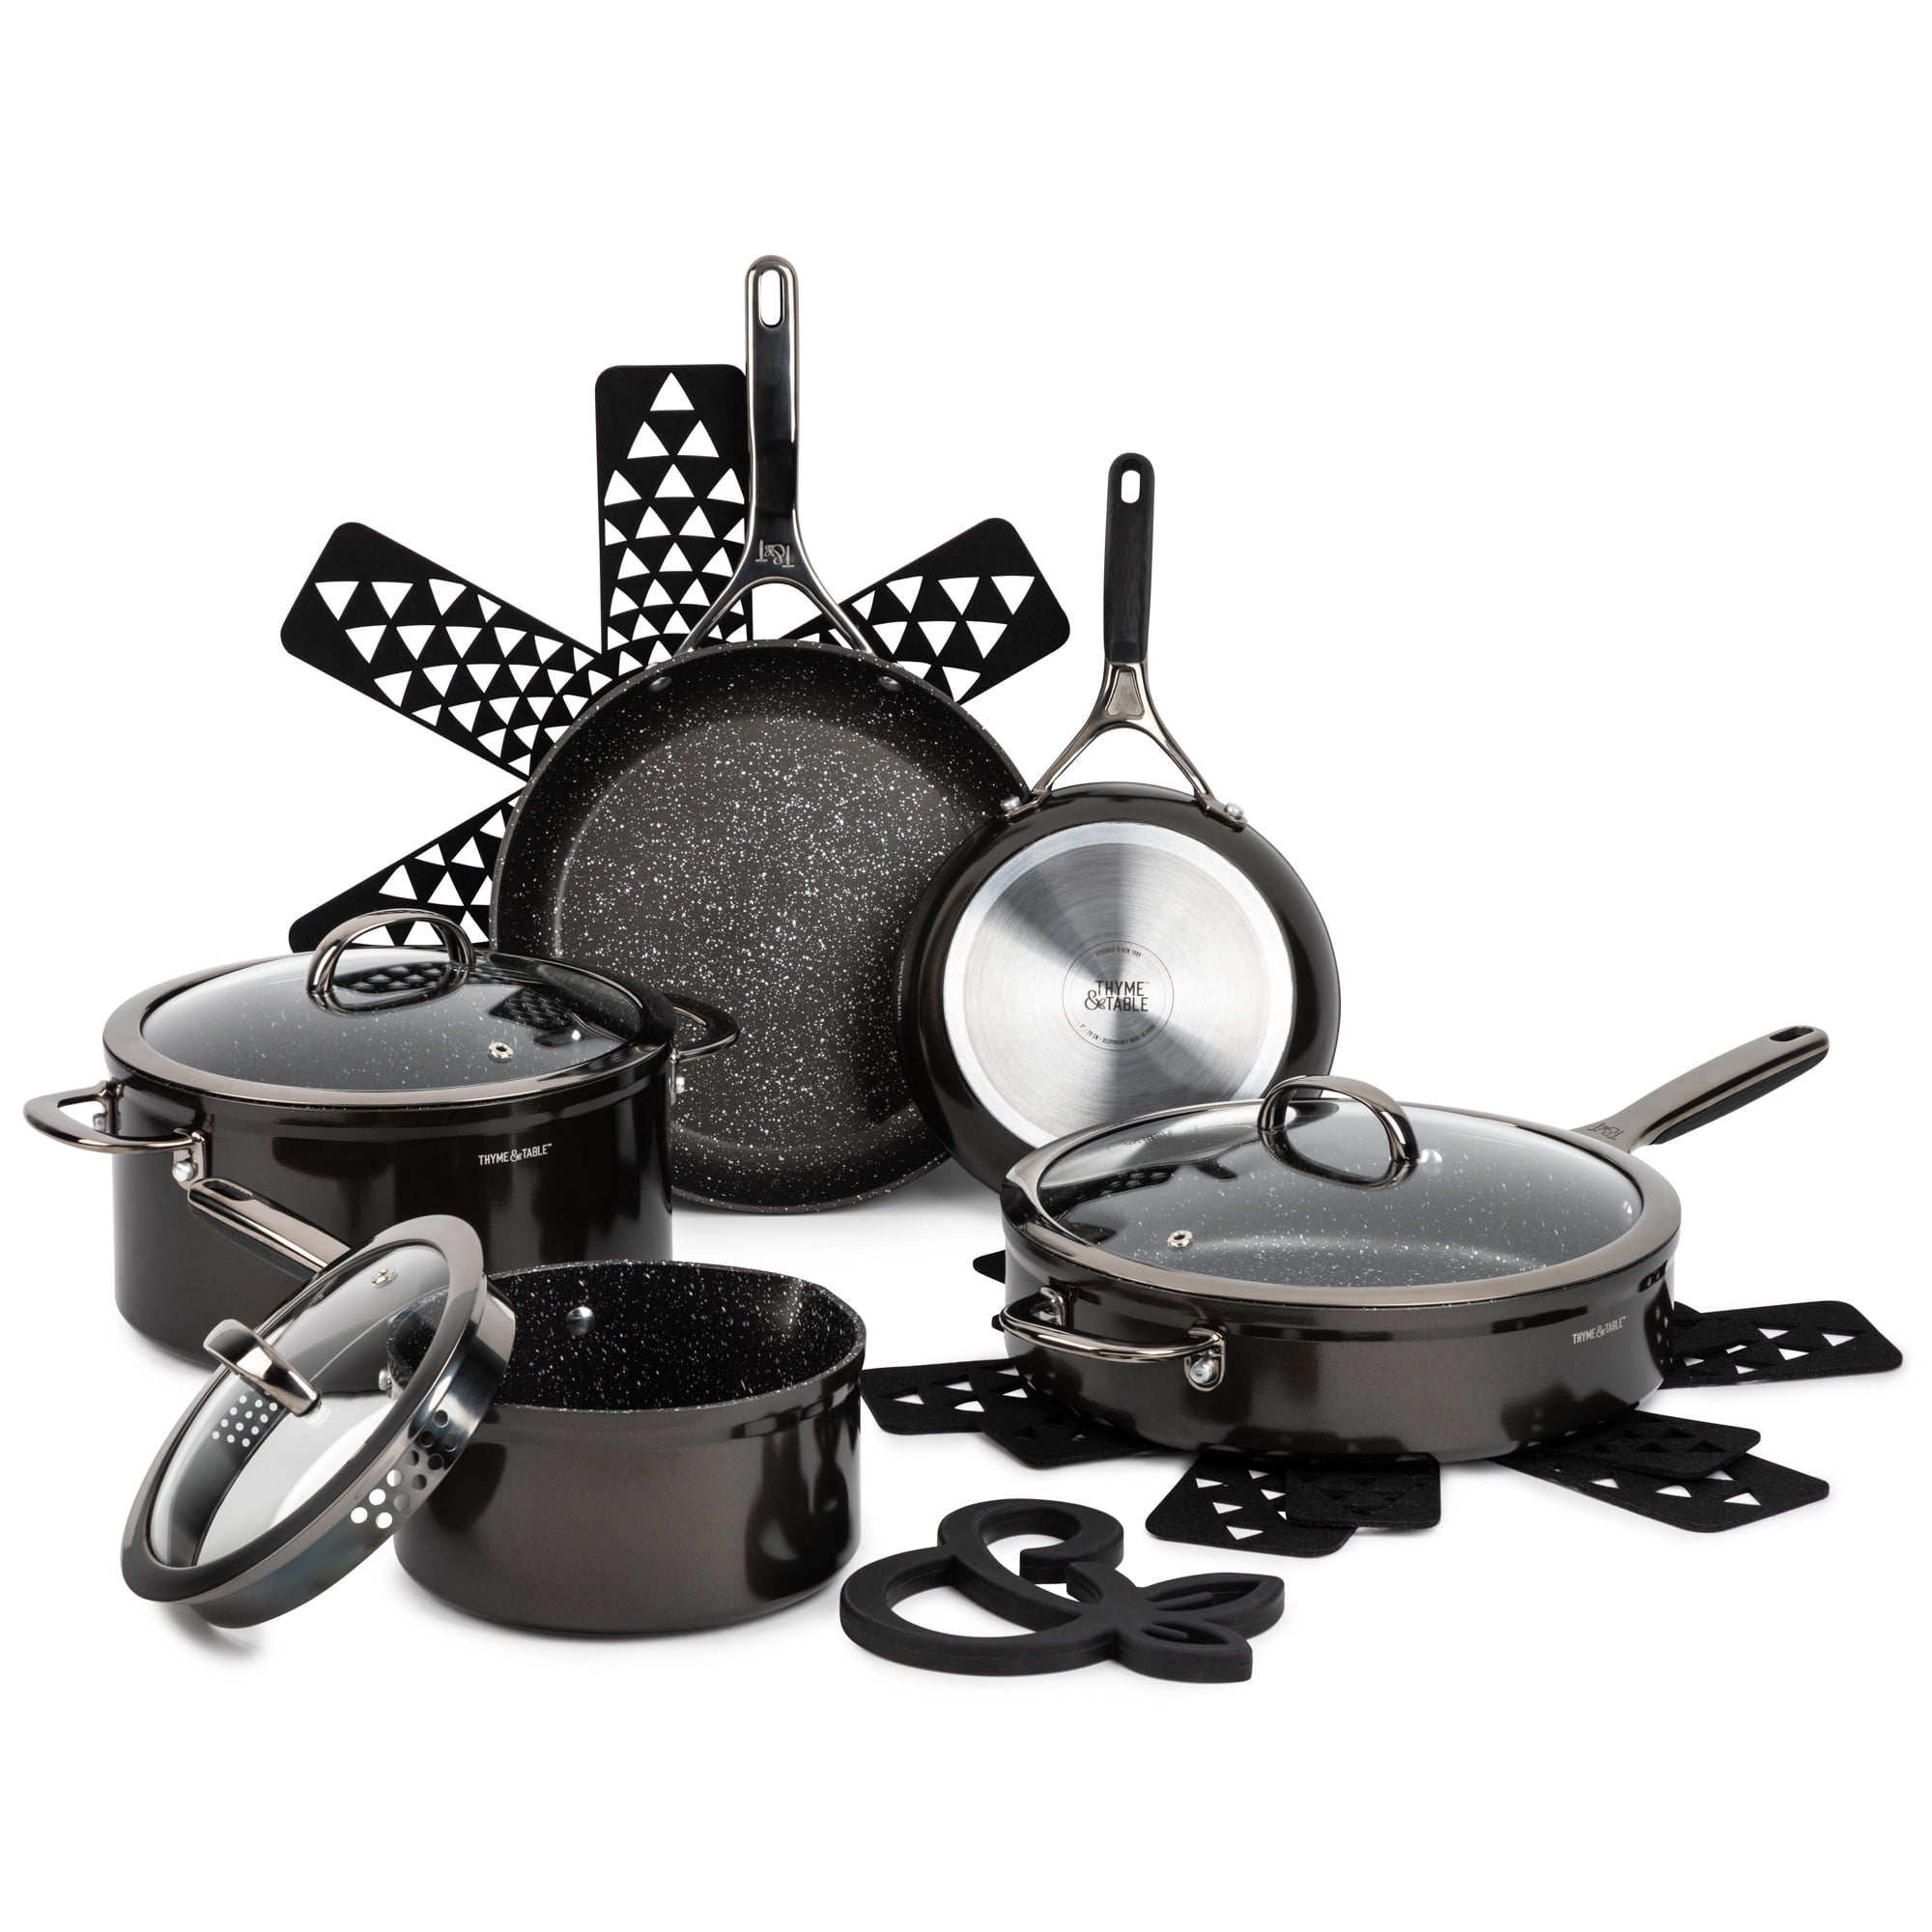 Thyme & Table Nonstick 12 Piece Supreme Cookware Set, Black